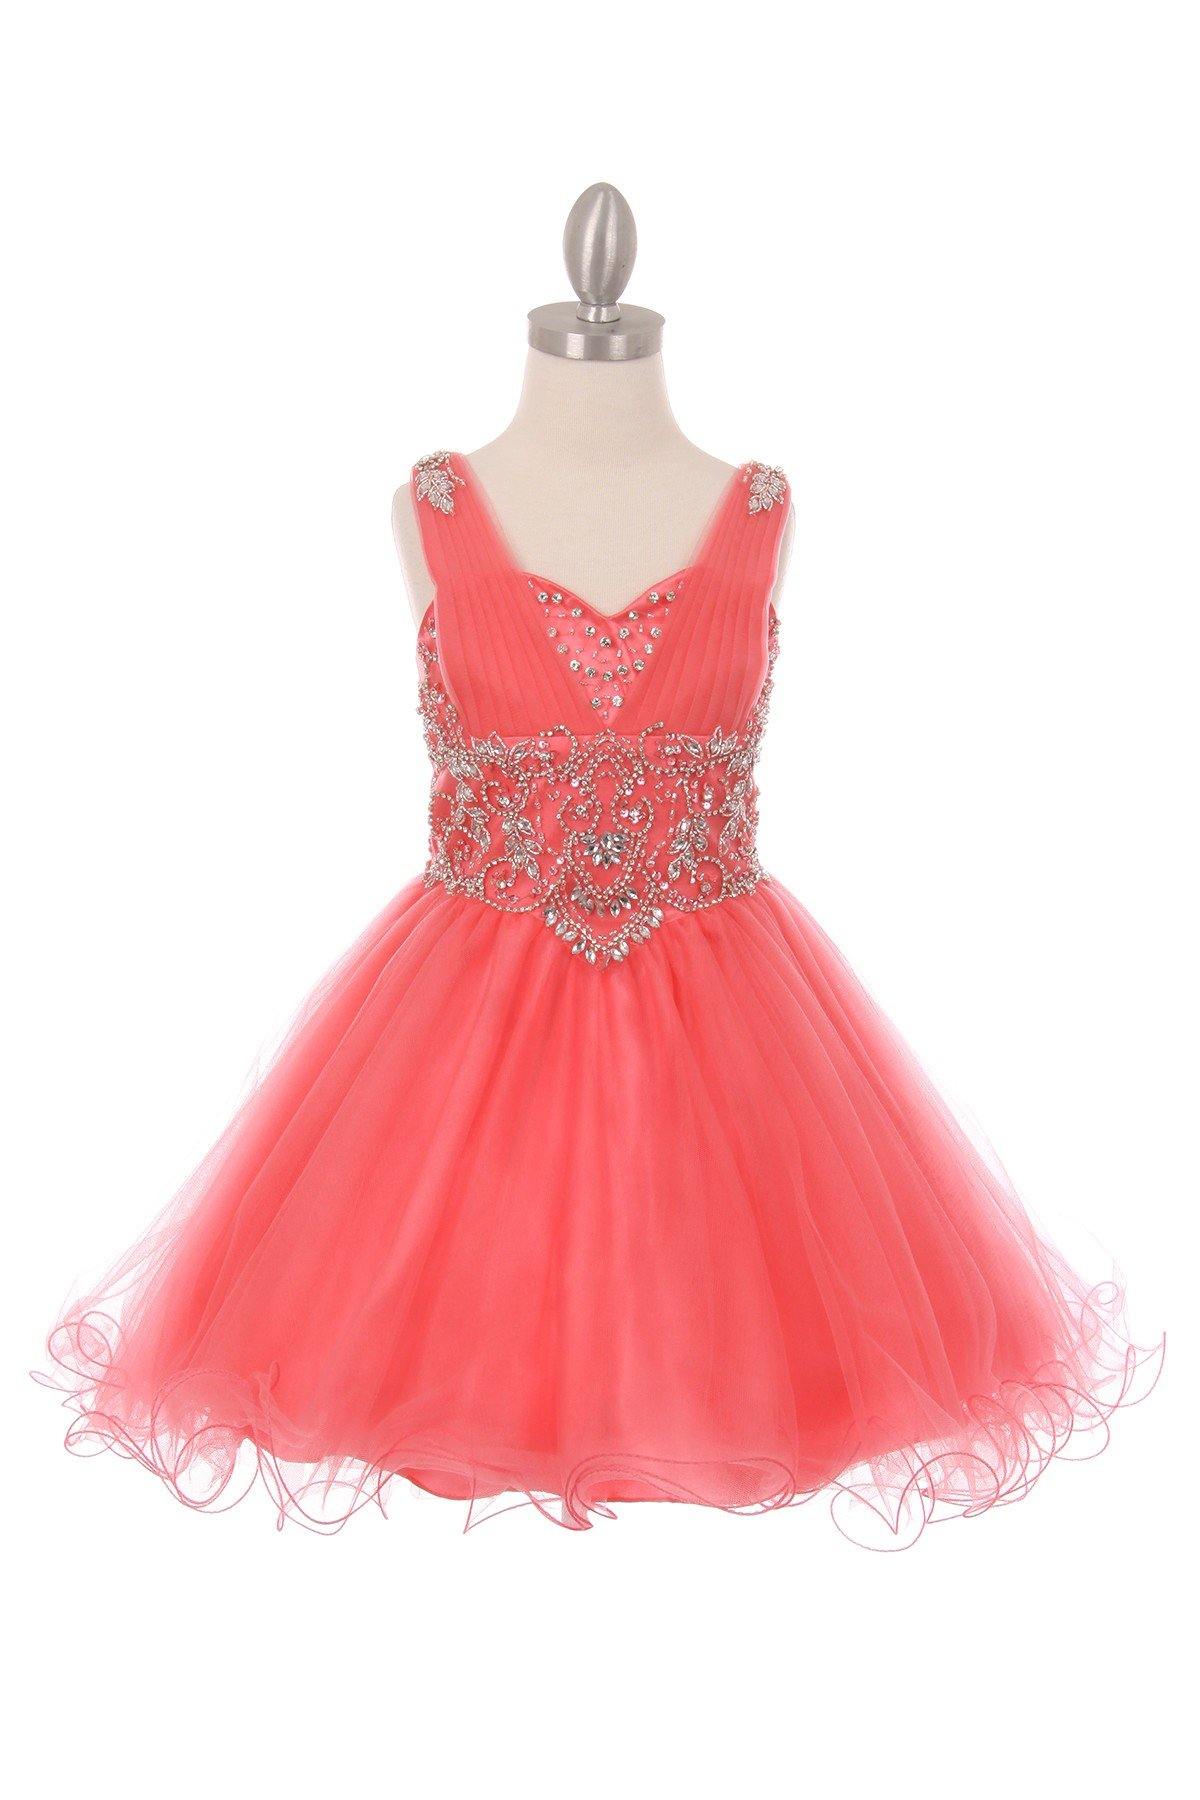 Short Beaded Flower Girl Dress - The Dress Outlet Cinderella Couture